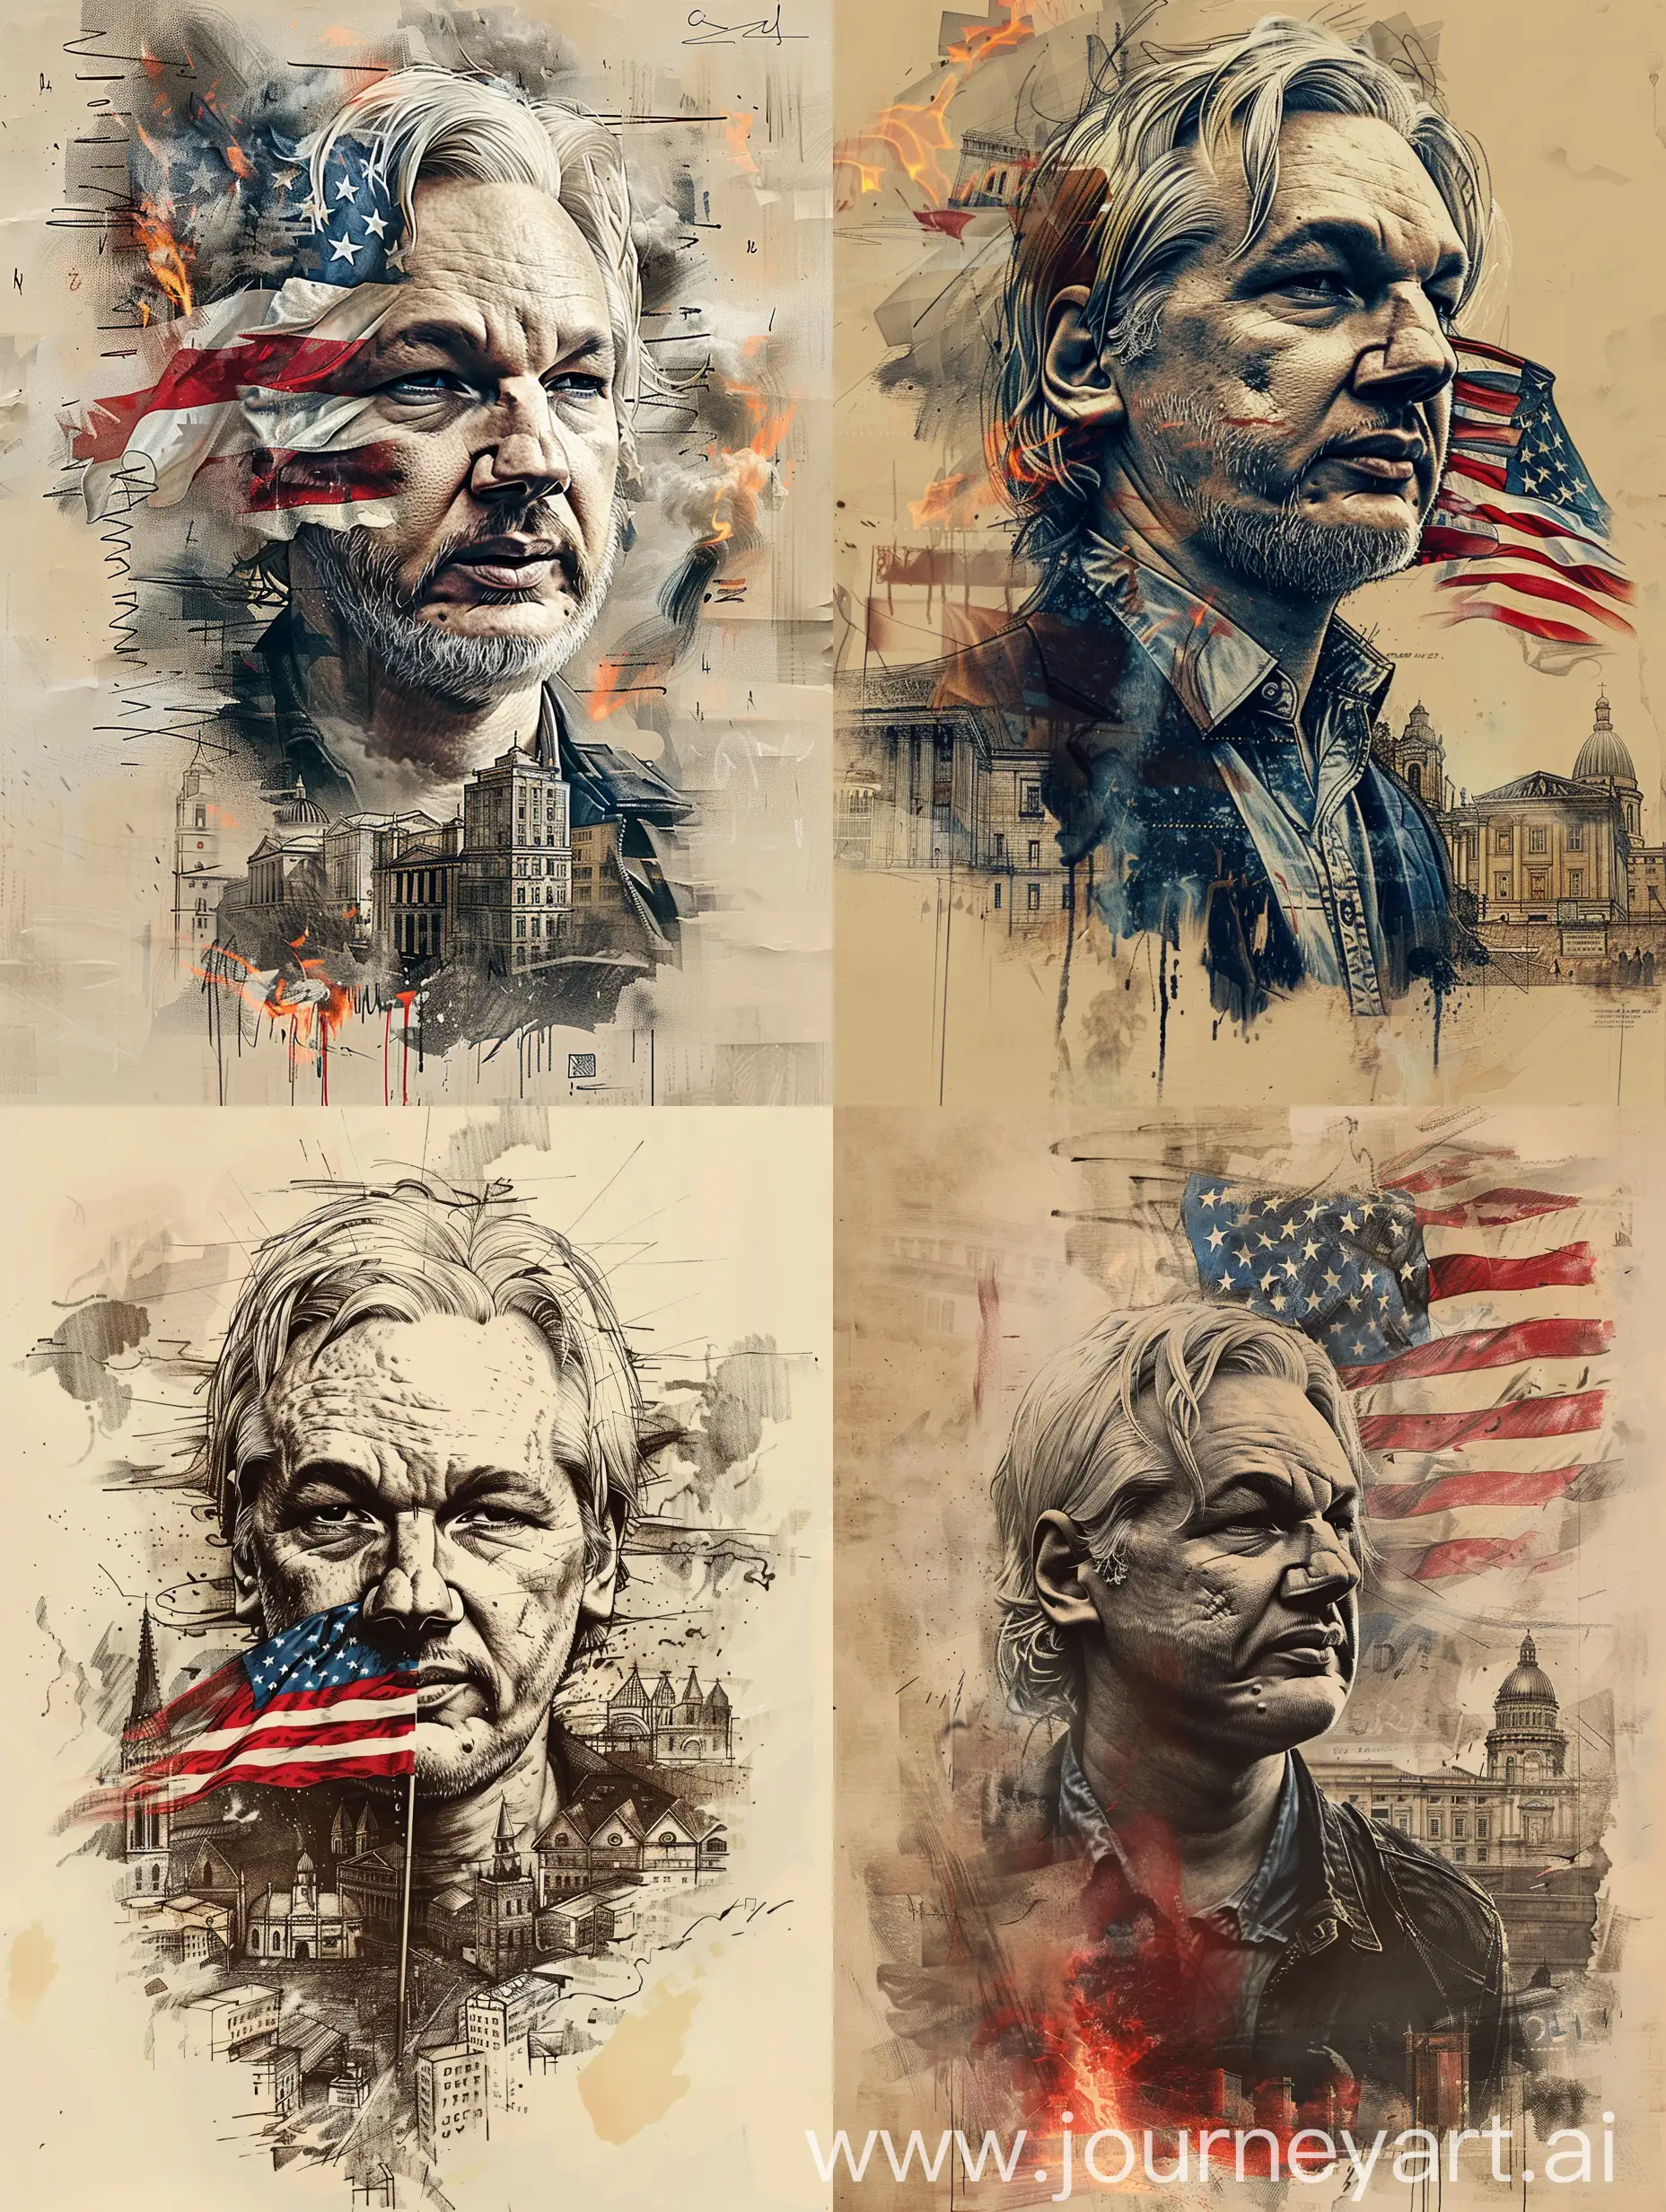 Julian-Assange-Portrait-with-Tapped-Mouth-and-US-Flag-Influence